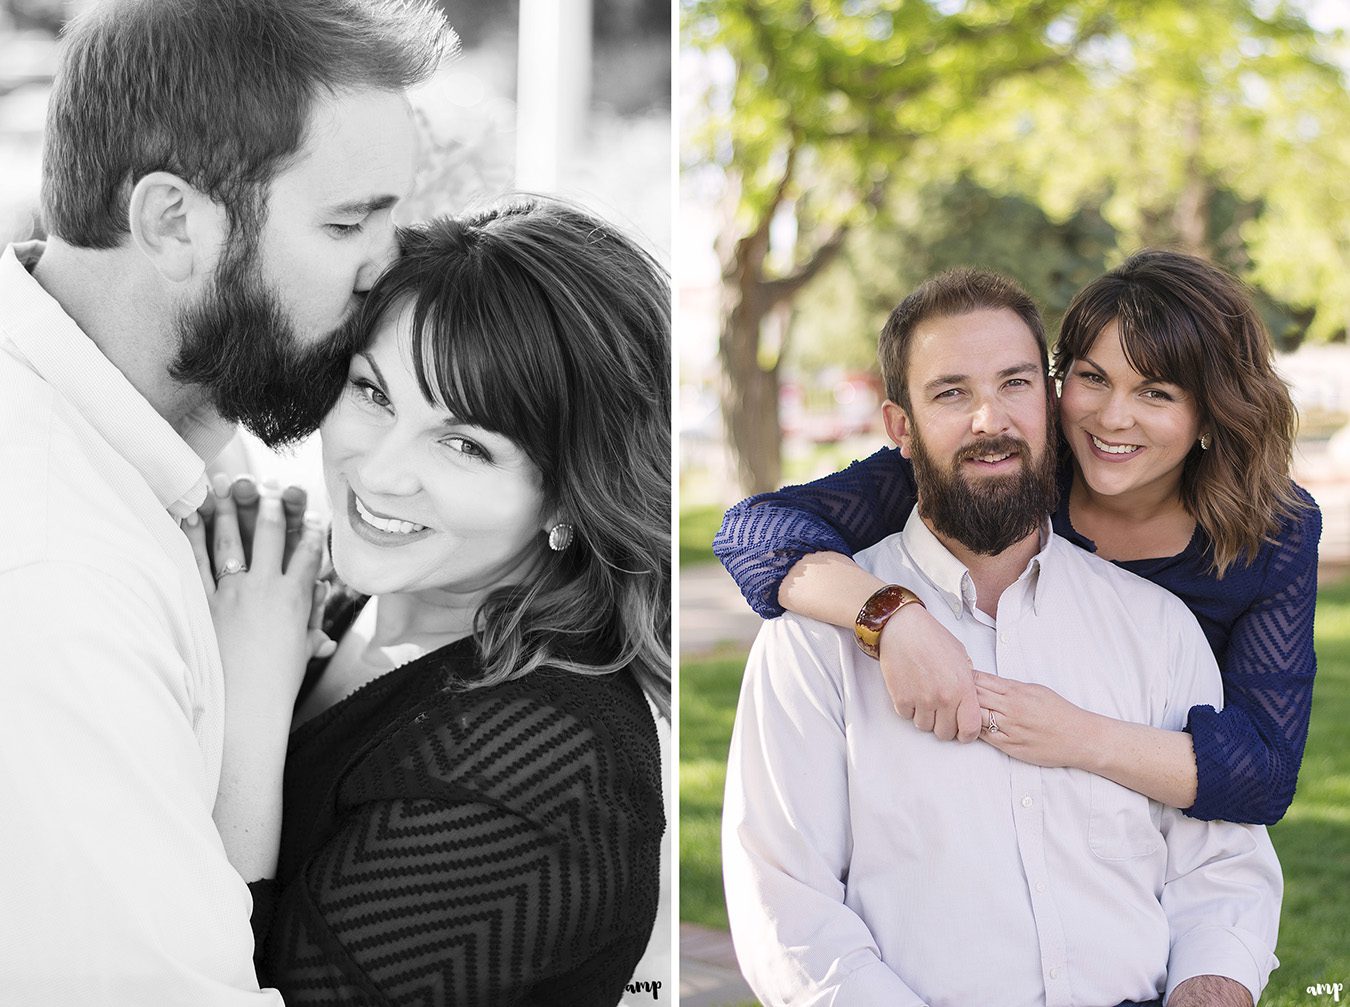 Engagement session in Downtown Grand Junction | amanda.matilda.photography